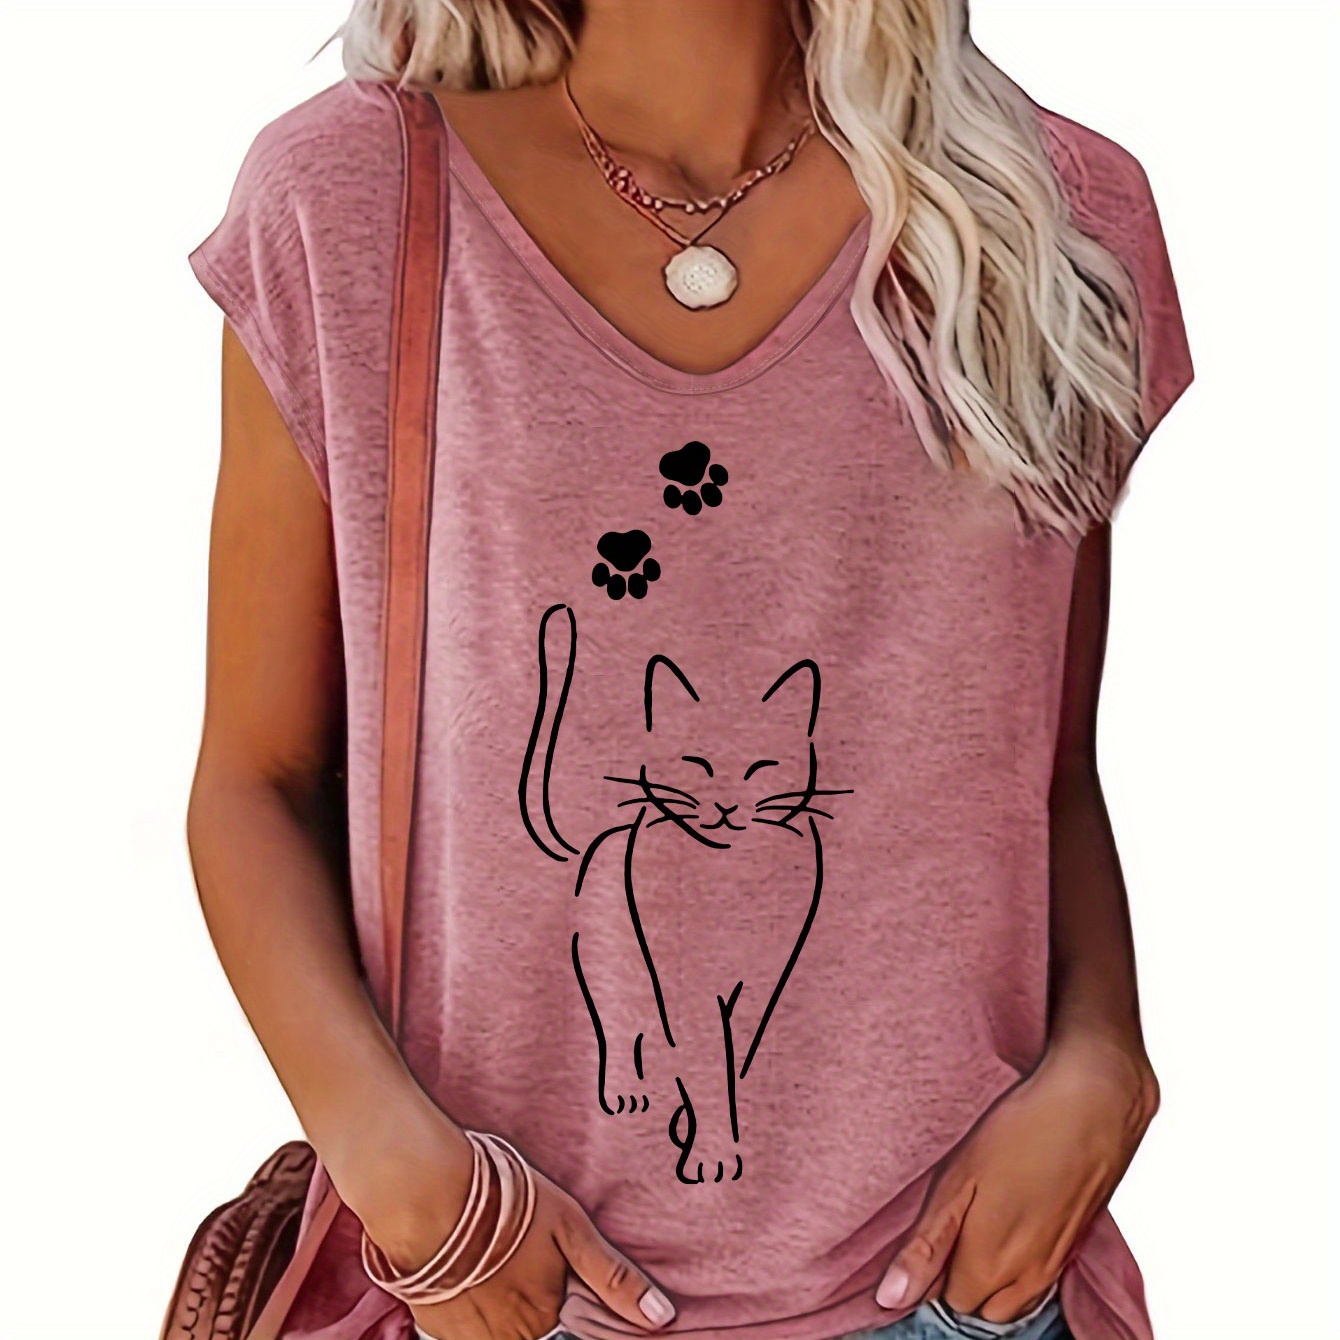 

Cat Print Cap Sleeve Tank Top, Casual V-neck Top For Summer & Spring, Women's Clothing